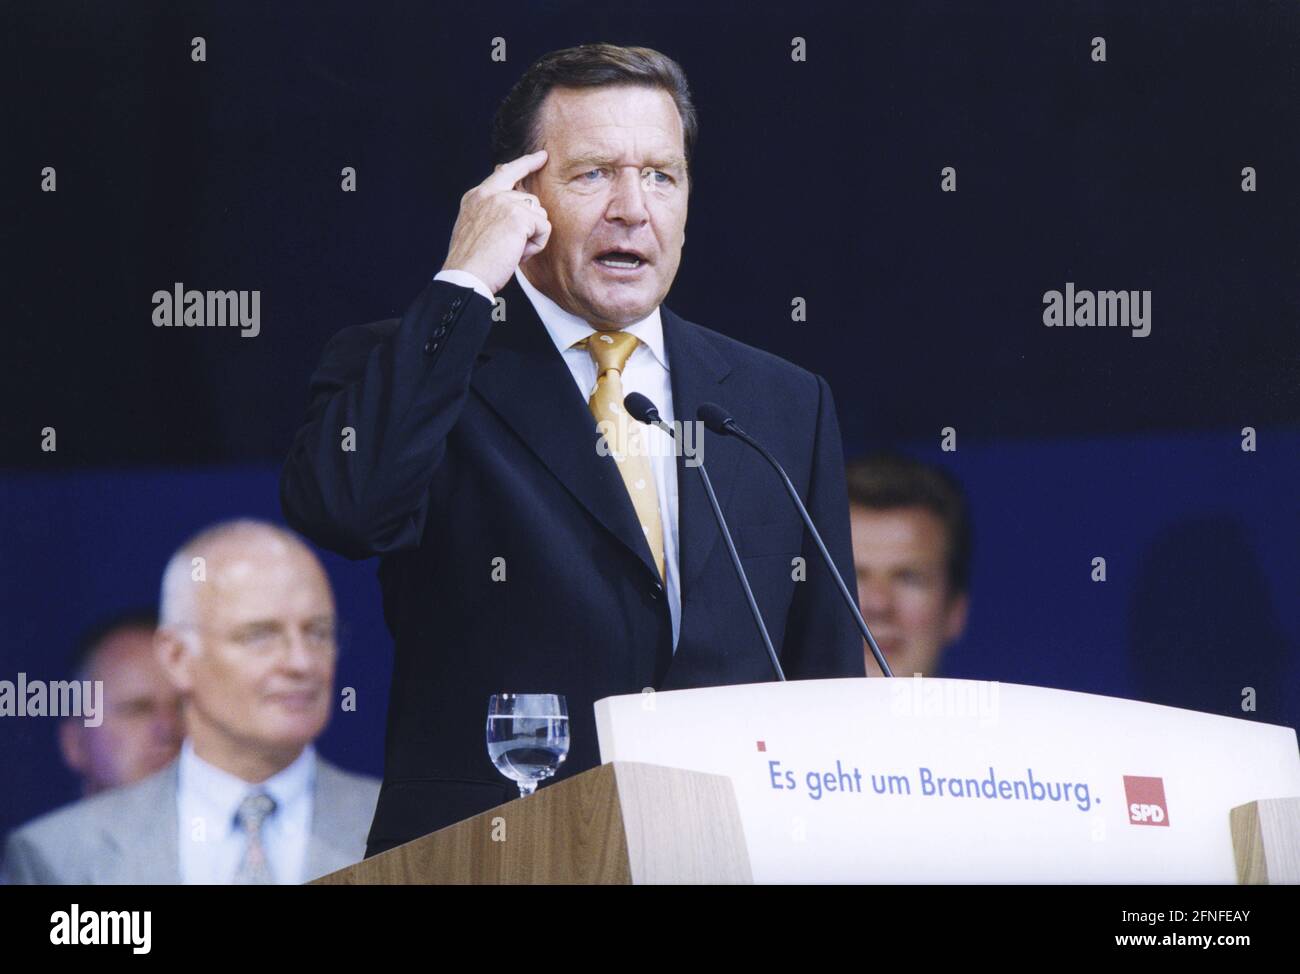 Chancellor Gerhard Schröder gives a speech at an SPD election campaign  event on the occasion of the state parliament election campaign in  Brandenburg. [automated translation] Stock Photo - Alamy